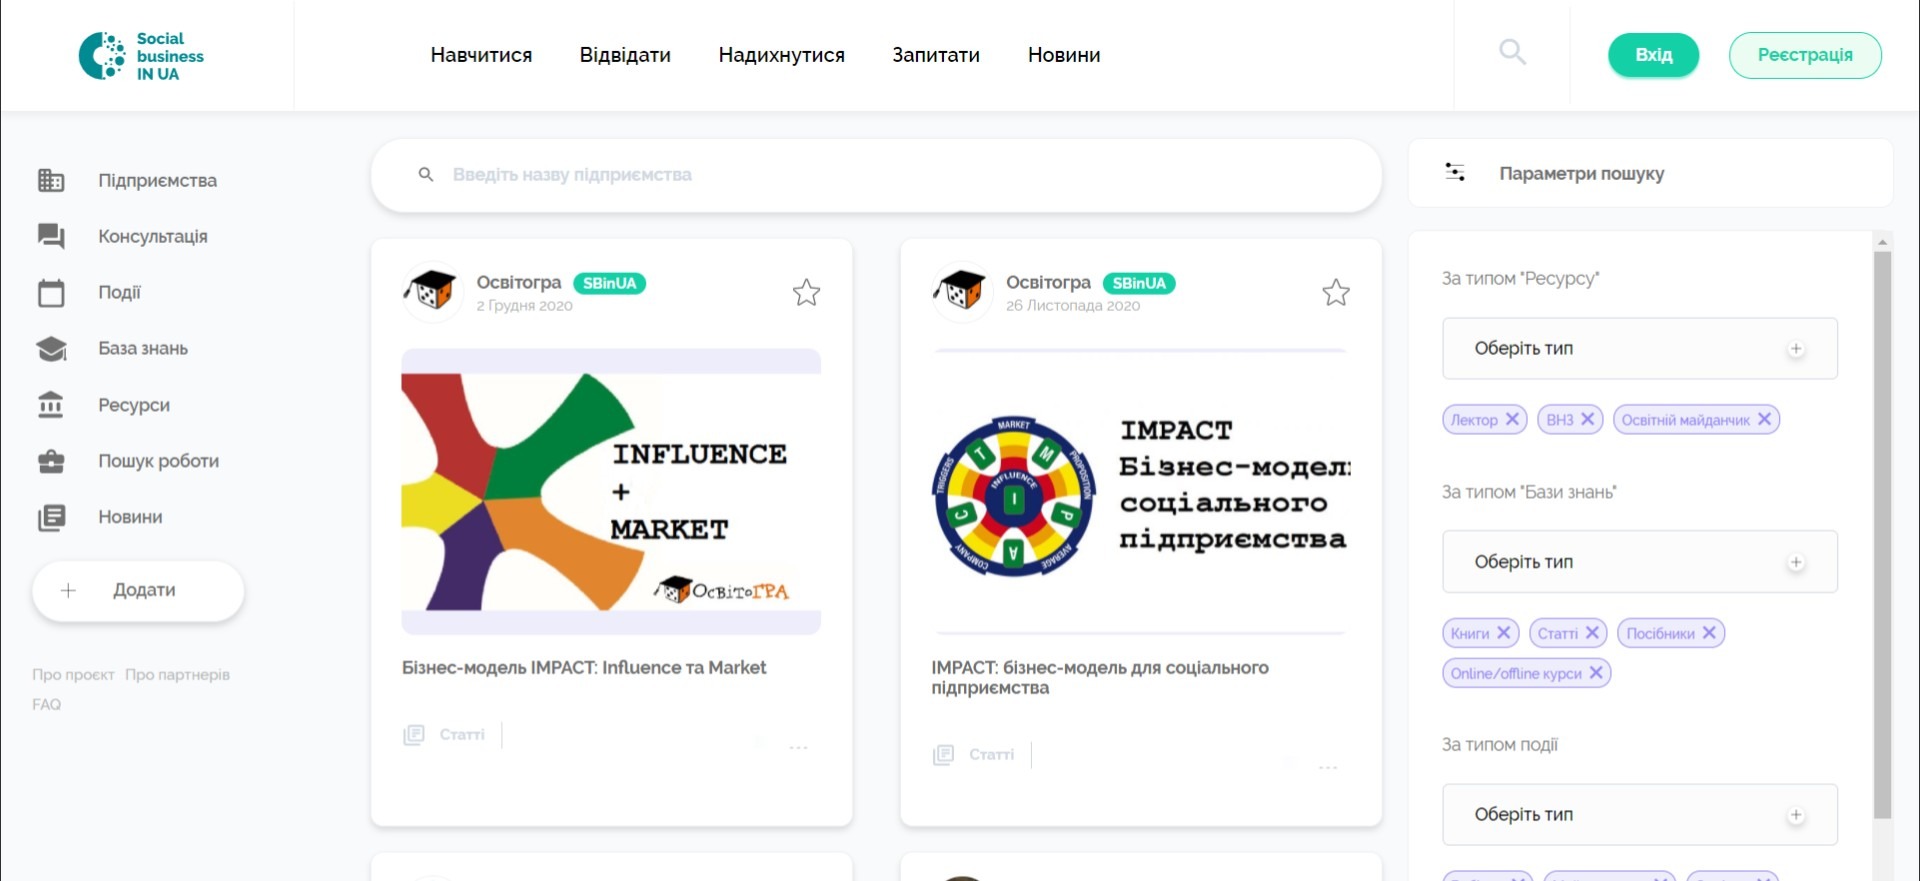 Social Business in UA Education Business Services Project